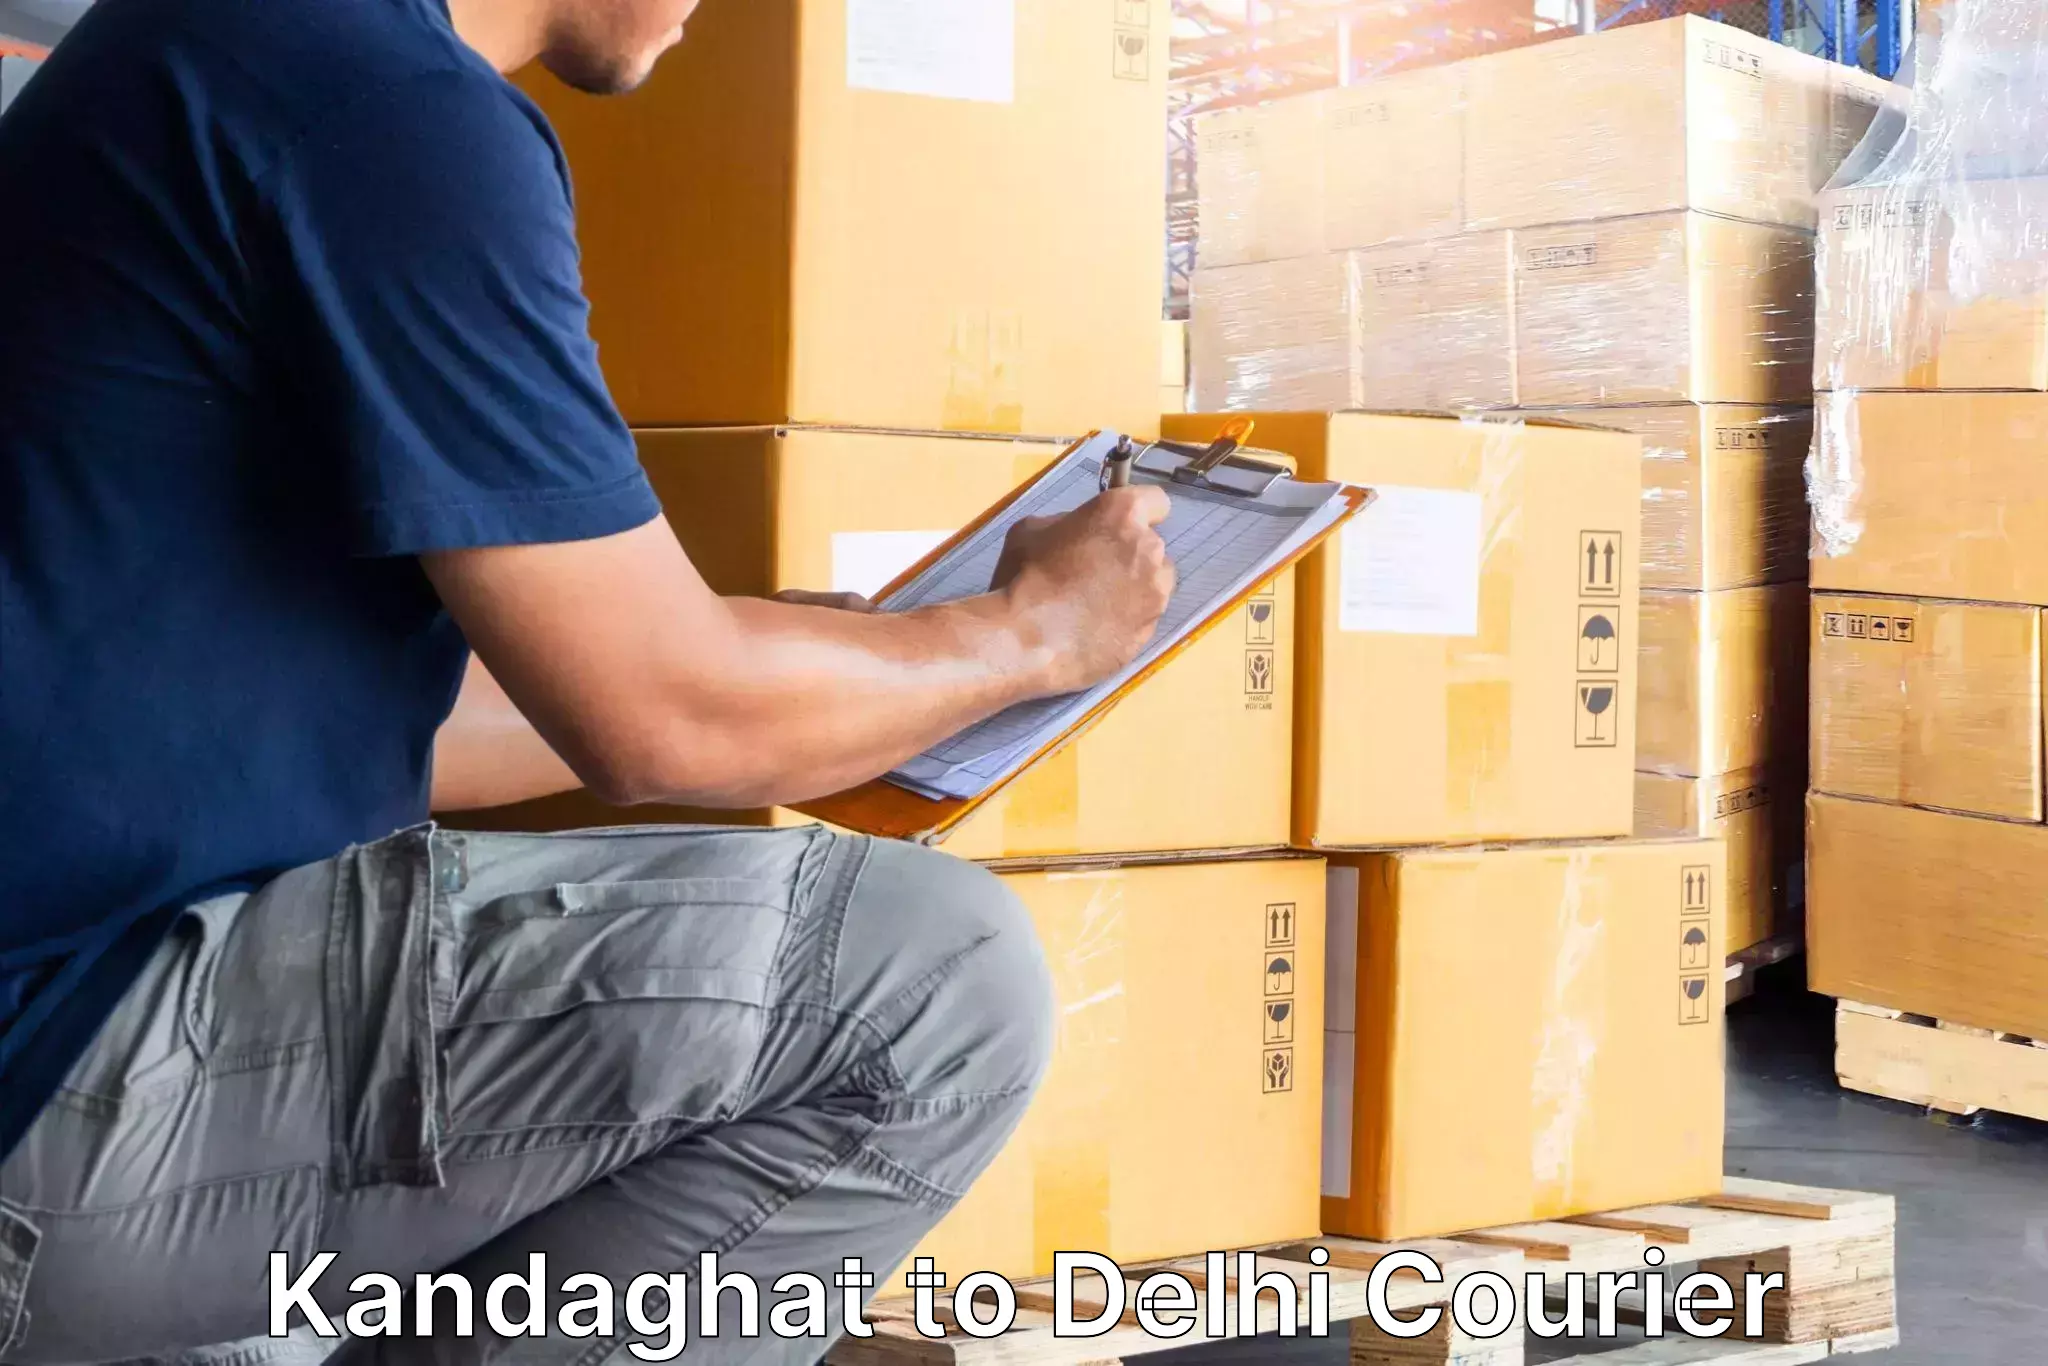 Trusted relocation experts Kandaghat to Delhi